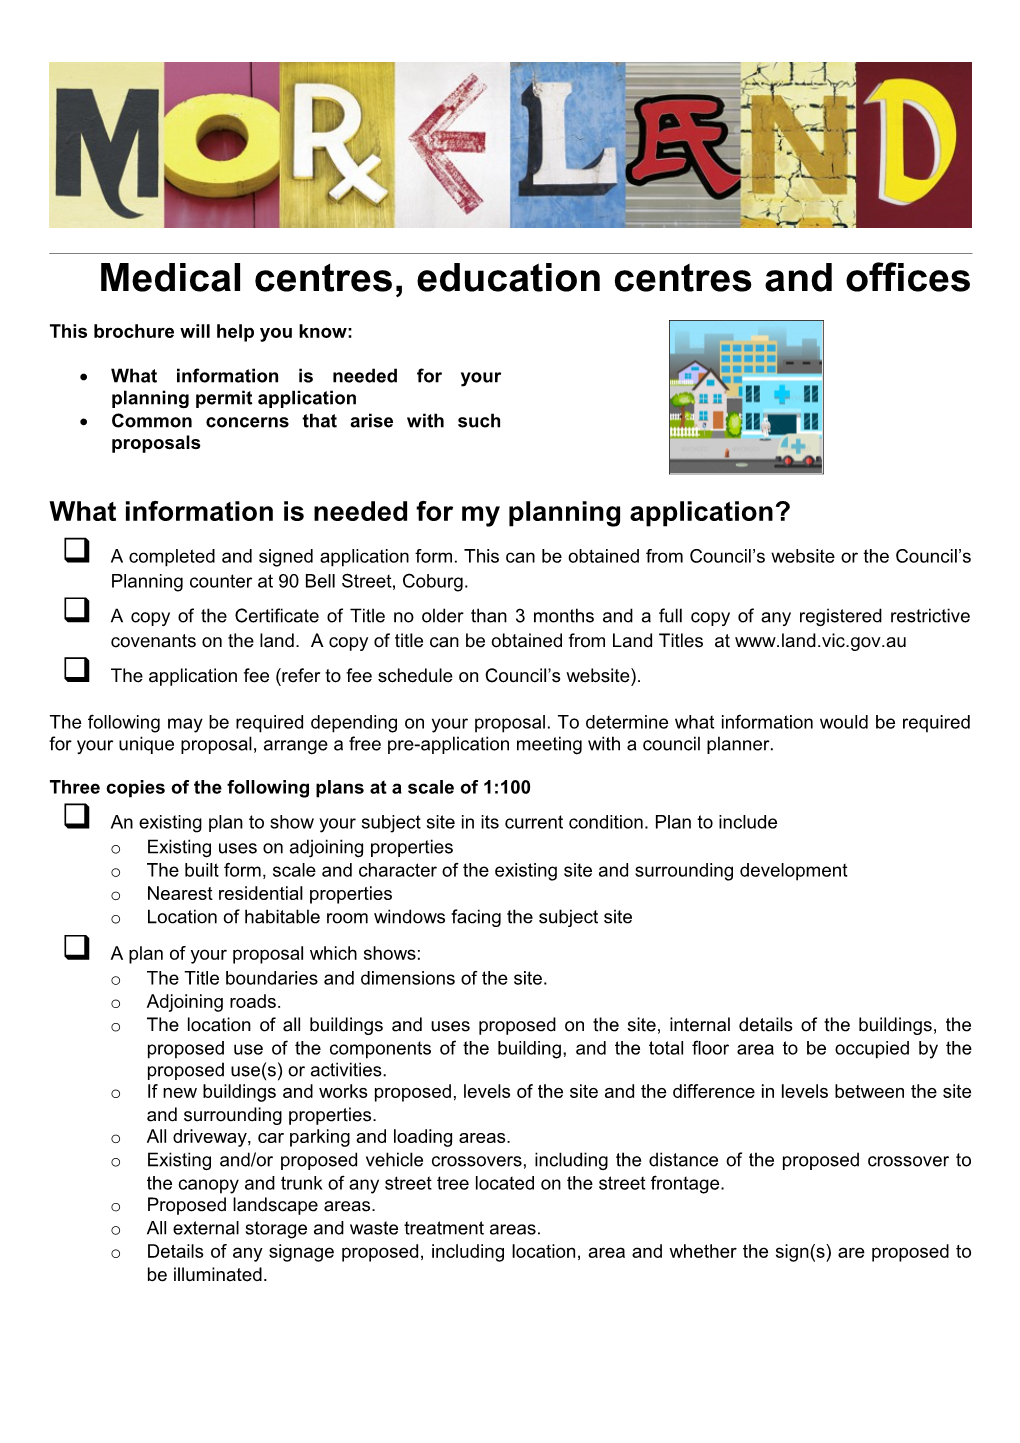 Medical Centres, Education Centres and Offices